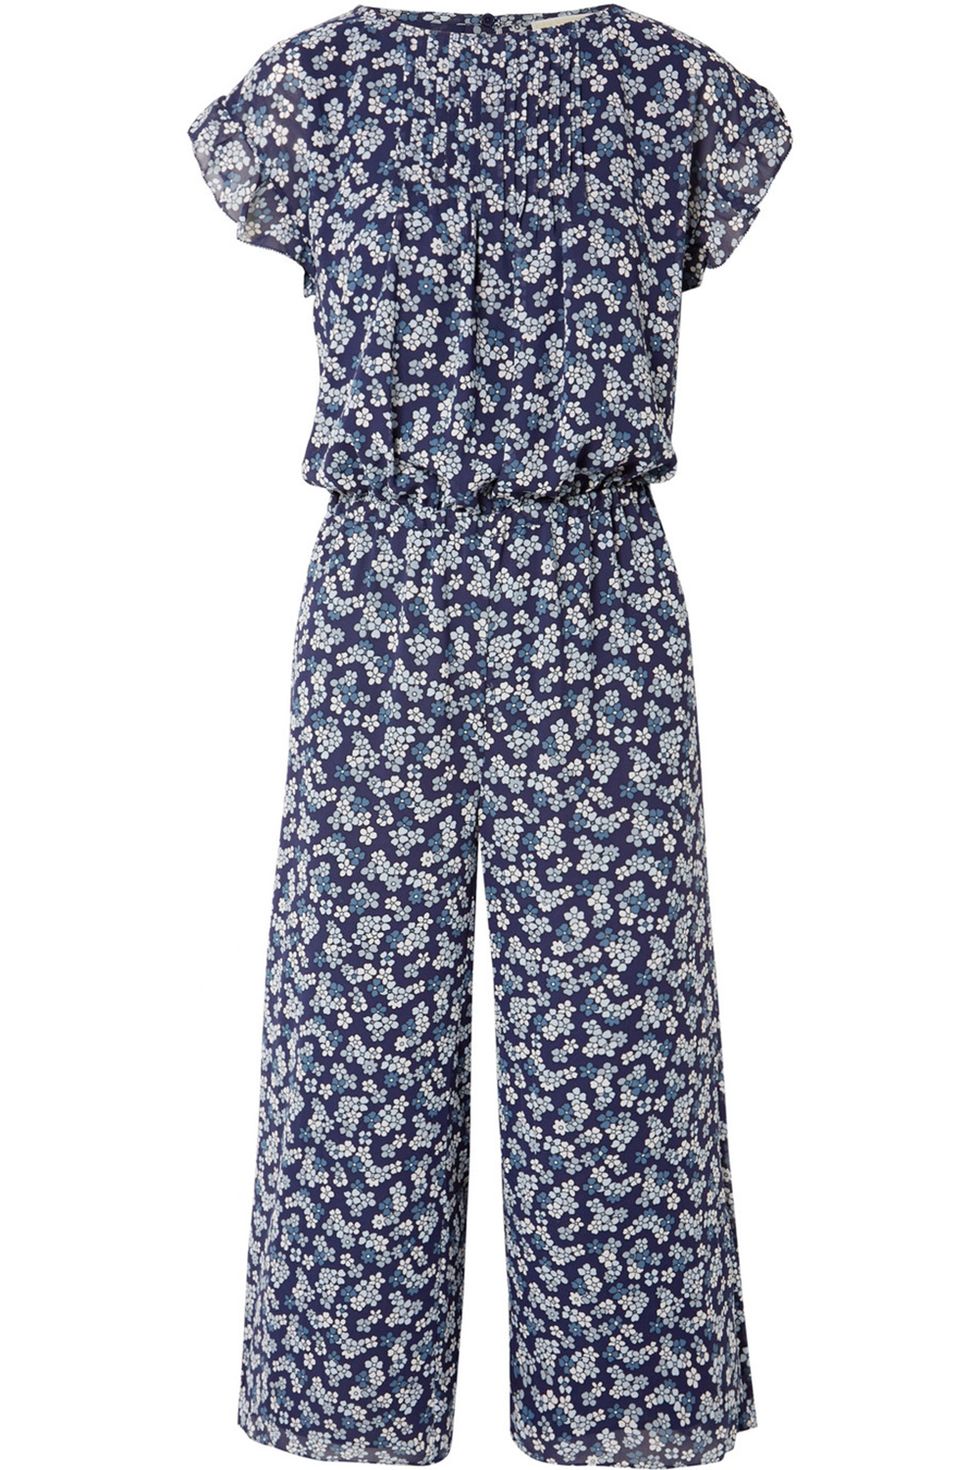 Clothing, Sleeve, Dress, Day dress, Nightwear, One-piece garment, Pajamas, Trousers, Overall, 